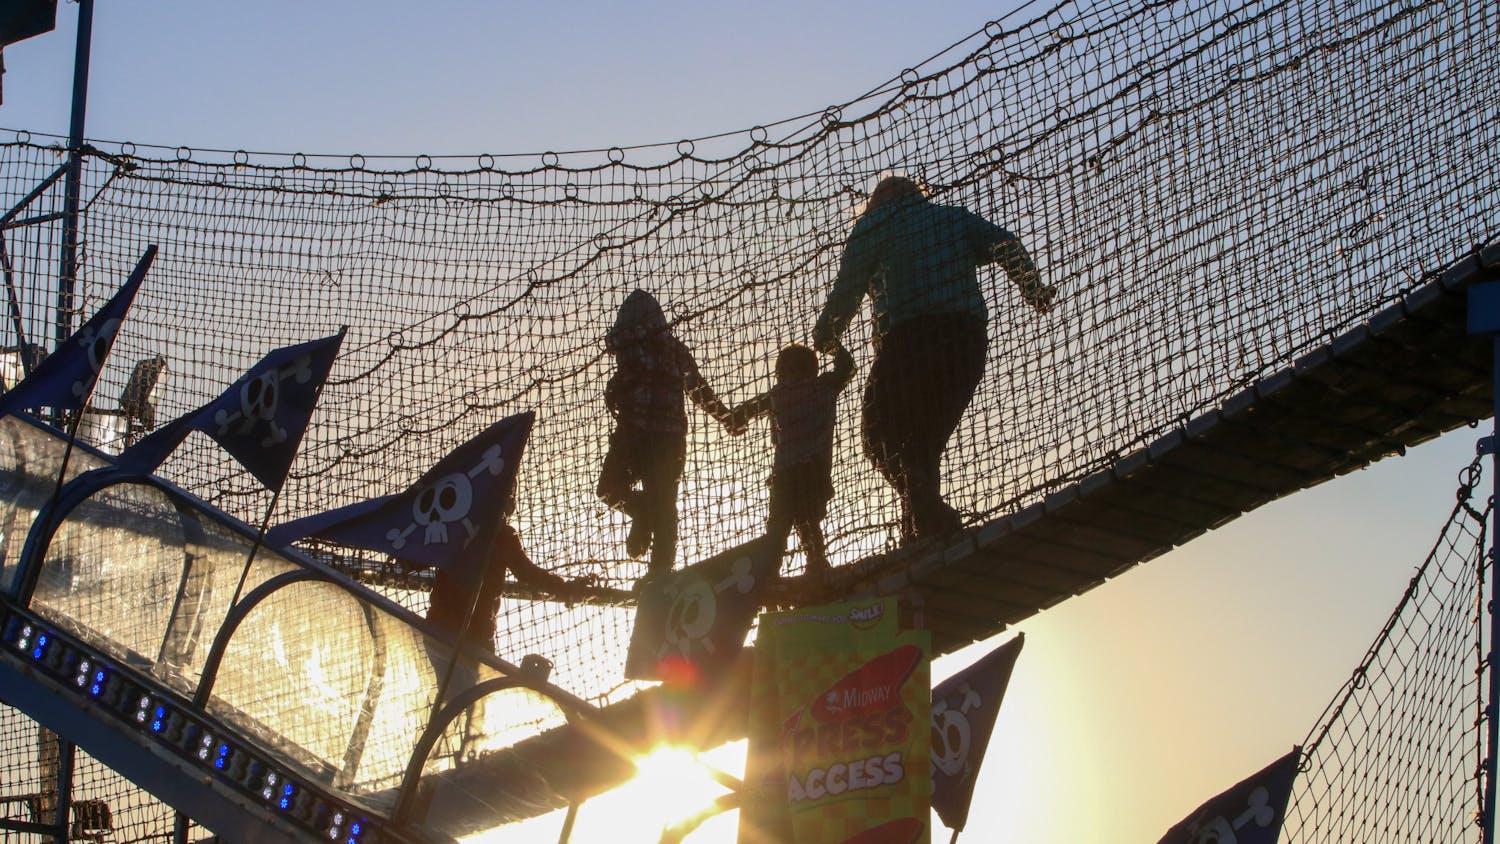 As the sun went down, families made their way across a bridge that was just one part of a bigger jungle gym. While some kids were found speeding across the bridge, this family took their time, hand in hand, to complete the course on Oct. 18, 2022.&nbsp;